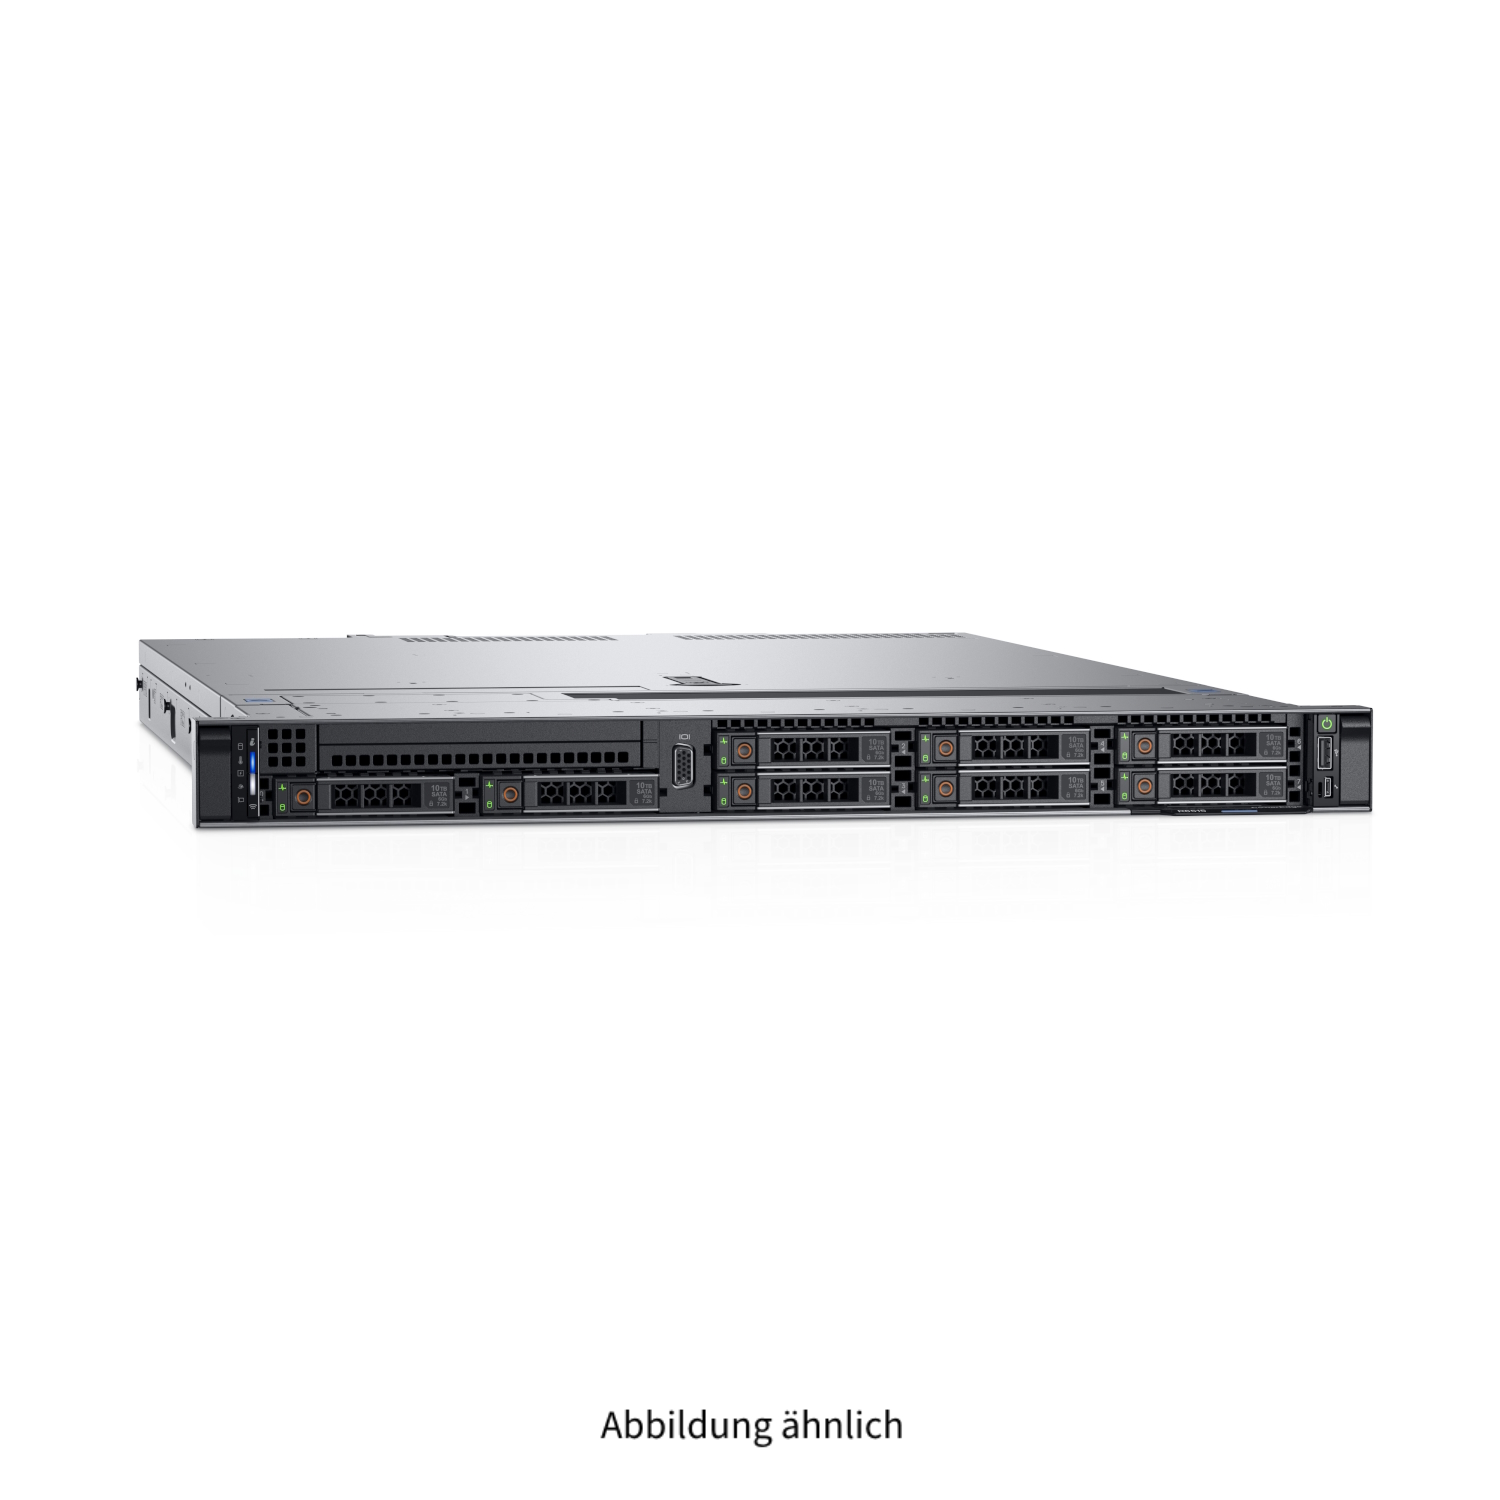 Dell R6515 8xSFF 1P Epyc 7282 2.80GHz 16C 16GB H730p 1x 480GB SATA SSD 1x 550W Rack Kit - Next Business Day Support 04.2026